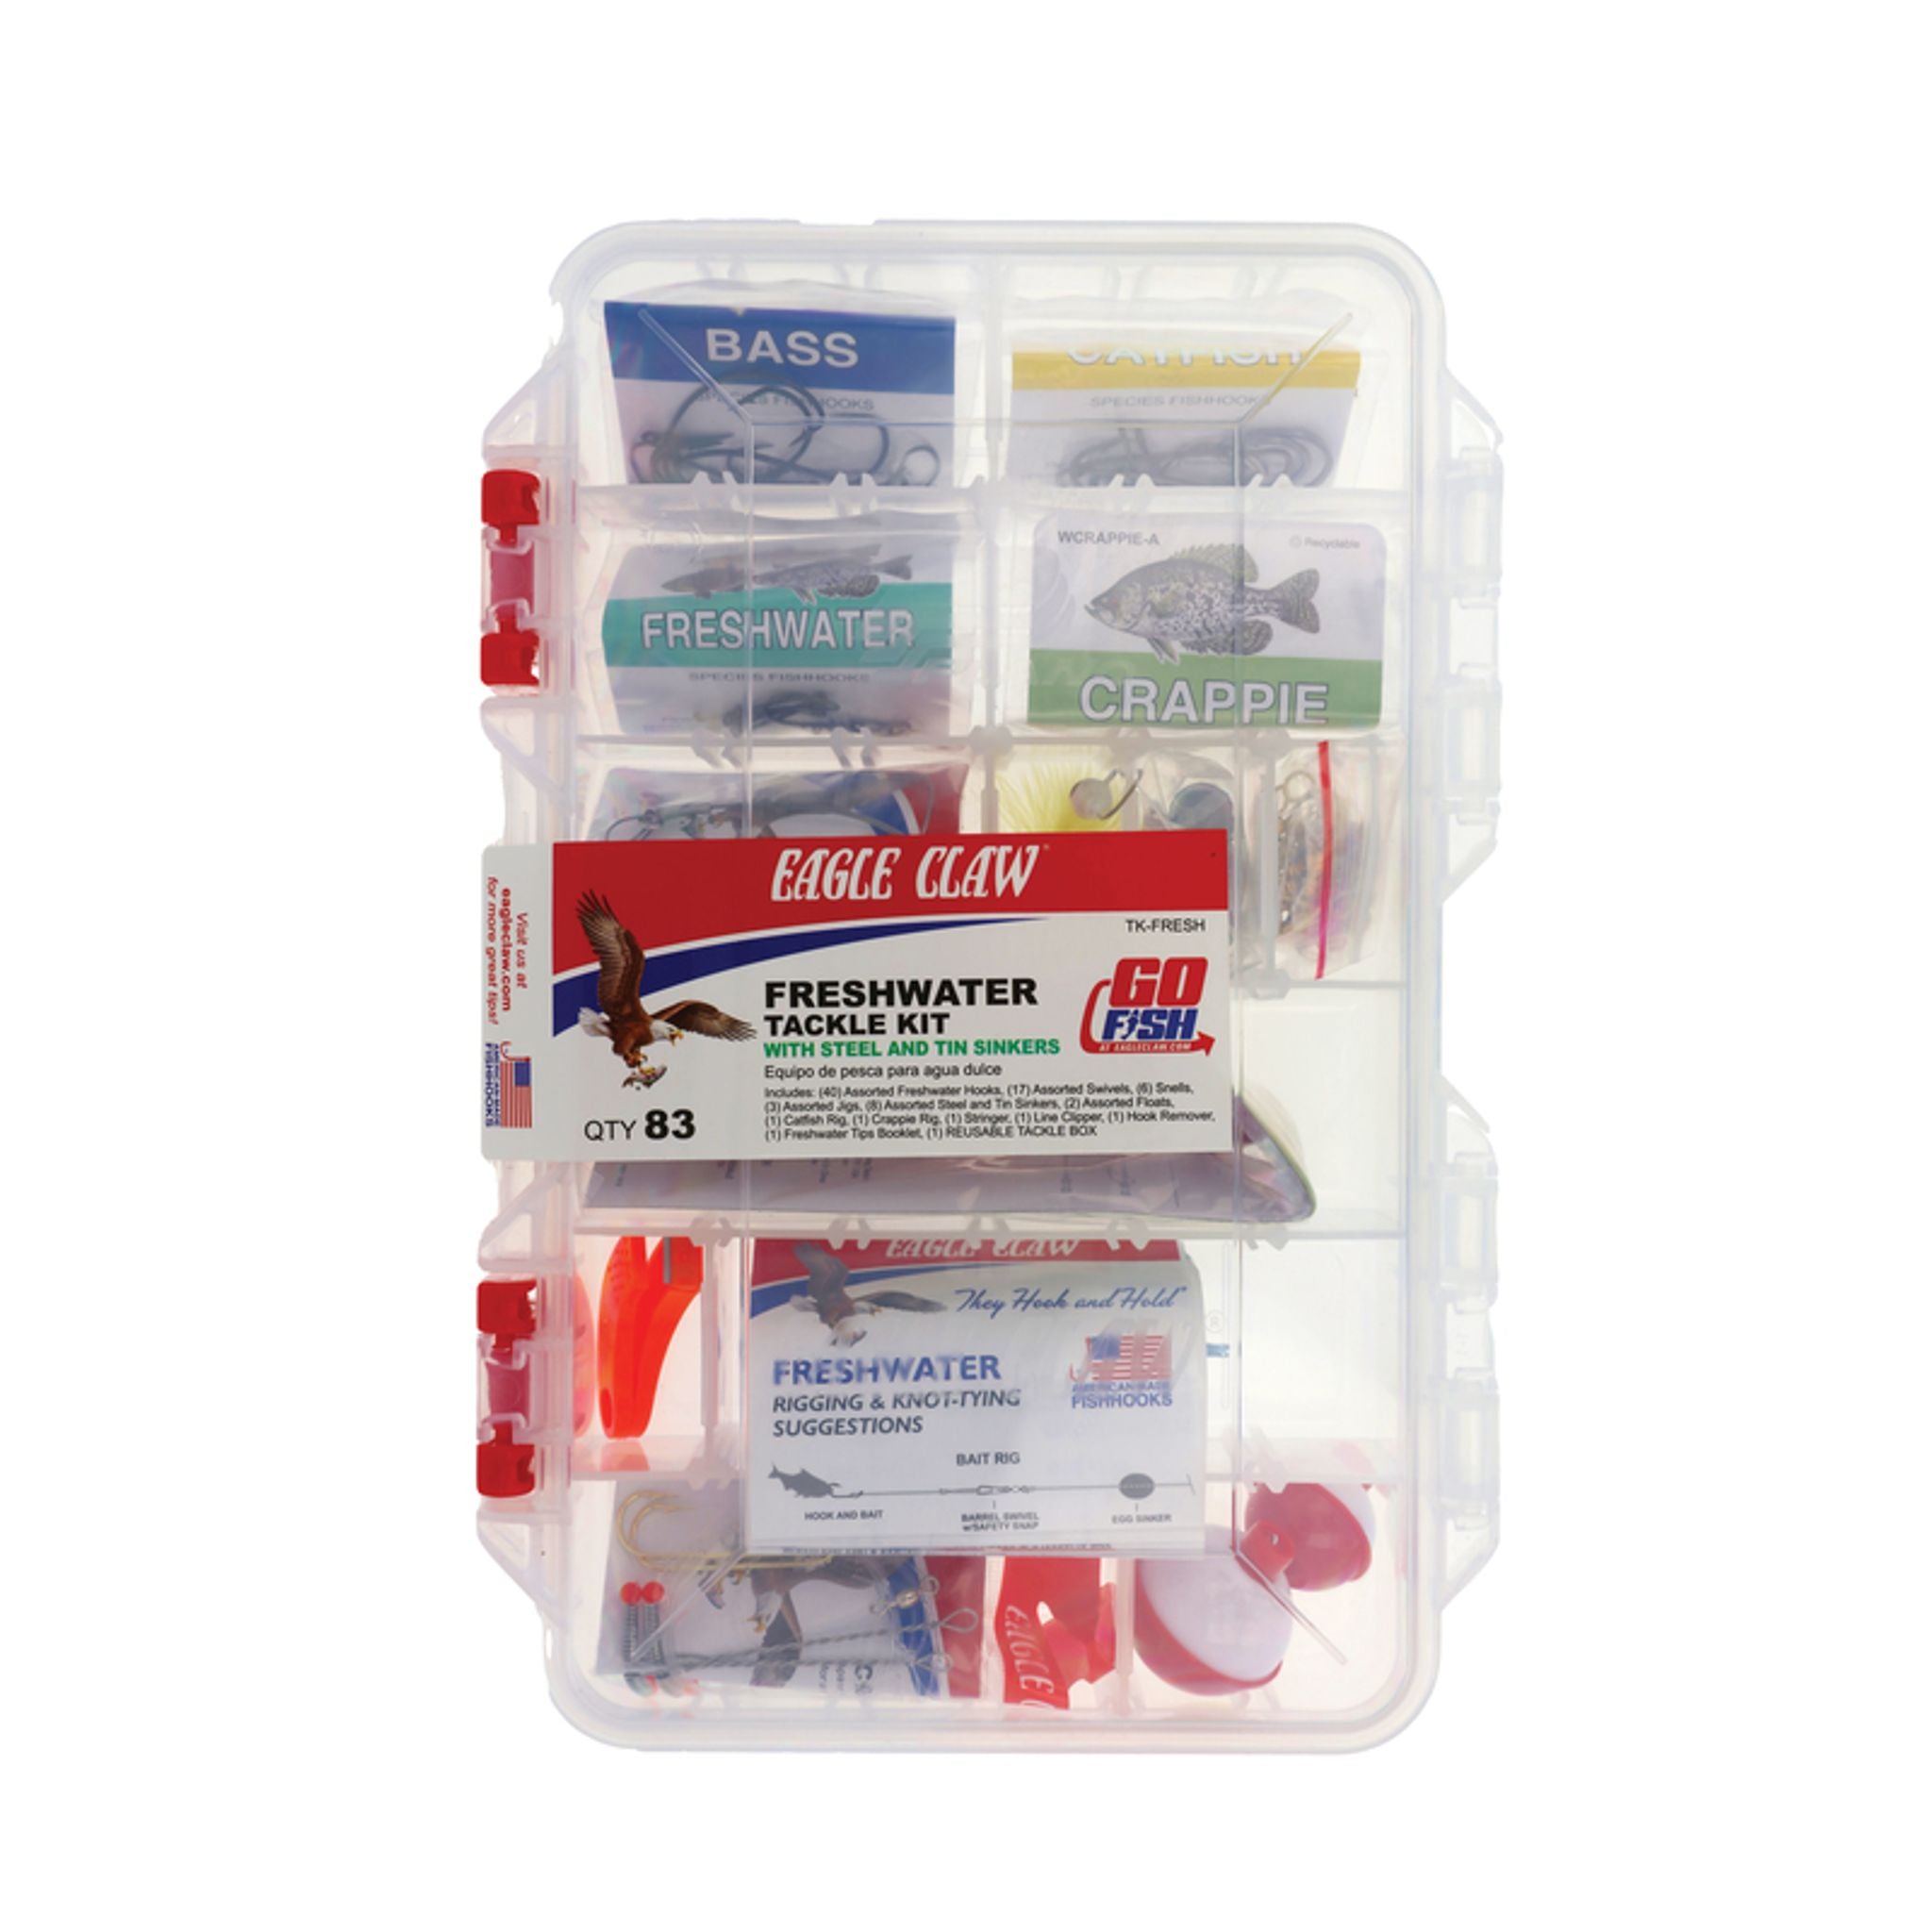 EAGLE CLAW TROUT TACKLE KIT, 68 PIECES, CONTAINS ASSORTMENT OF HOOKS,  TACKLE AND RIGS FOR FISHING FRESHWATER TROUT